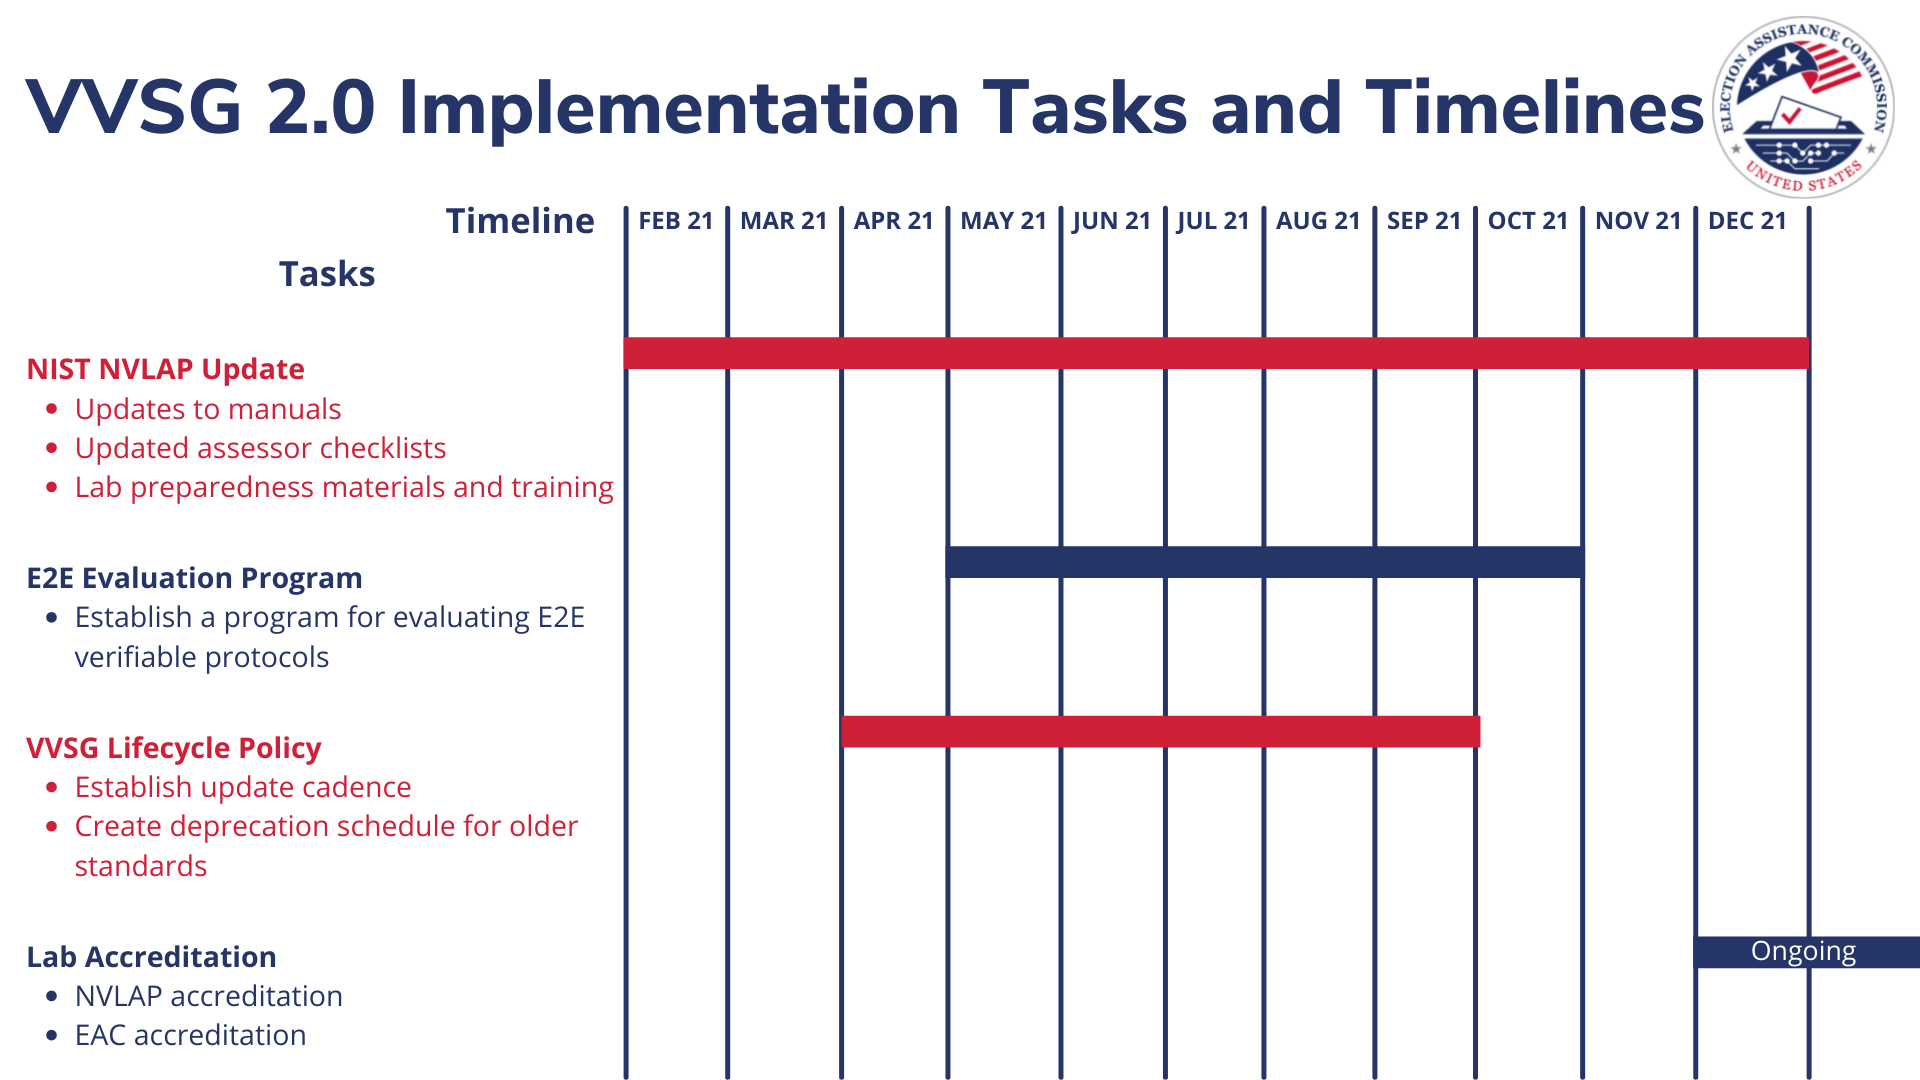 Gantt Chart Timeline with the following text:  "VVSG 2.0 Implementation Tasks and Timelines NIST NVLAP Update (Feb 2021 - Dec 2021)  Updates to manuals Updated assessor checklists Lab preparedness materials and training E2E Evaluation Program (May 2021 - Aug 2021)  Establish a program for evaluating E2E verifiable protocols VVSG Lifecycle Policy (April 2021 - September 2021)  Establish update cadence Create deprecation schedule for older standards Lab Accreditation (Dec 2021 - Ongoing)  NVLAP accreditation EAC accreditation"